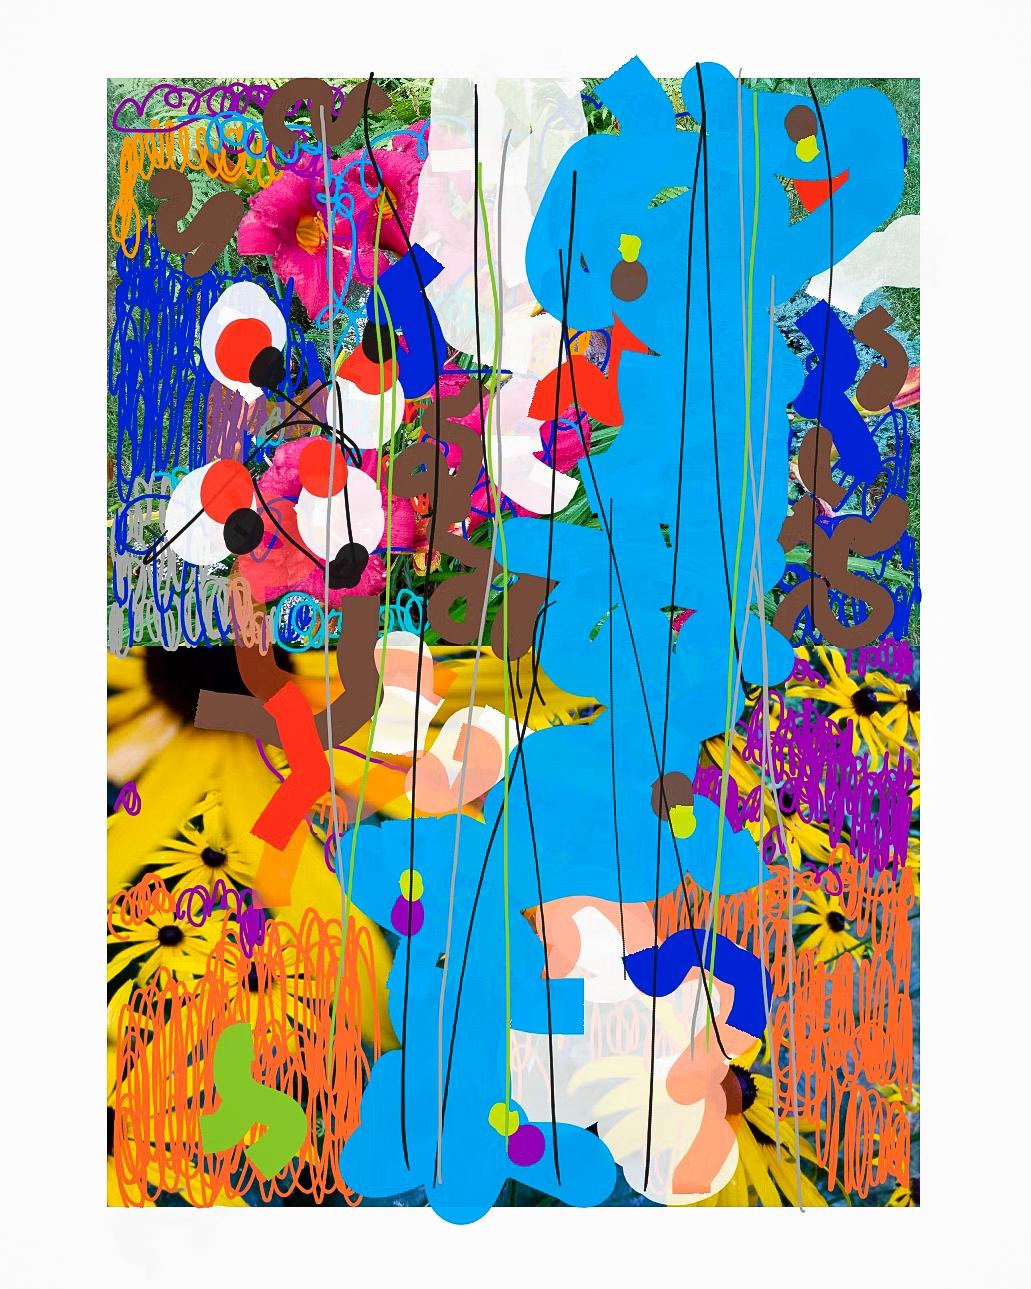 This abstract digital drawing is an explosion of color, line, and form. Images of yellow flowers are in the bottom half of the image give a sense of blooming personality. The symphony of cyan blue, earthy browns, and scarlets complement the swirly